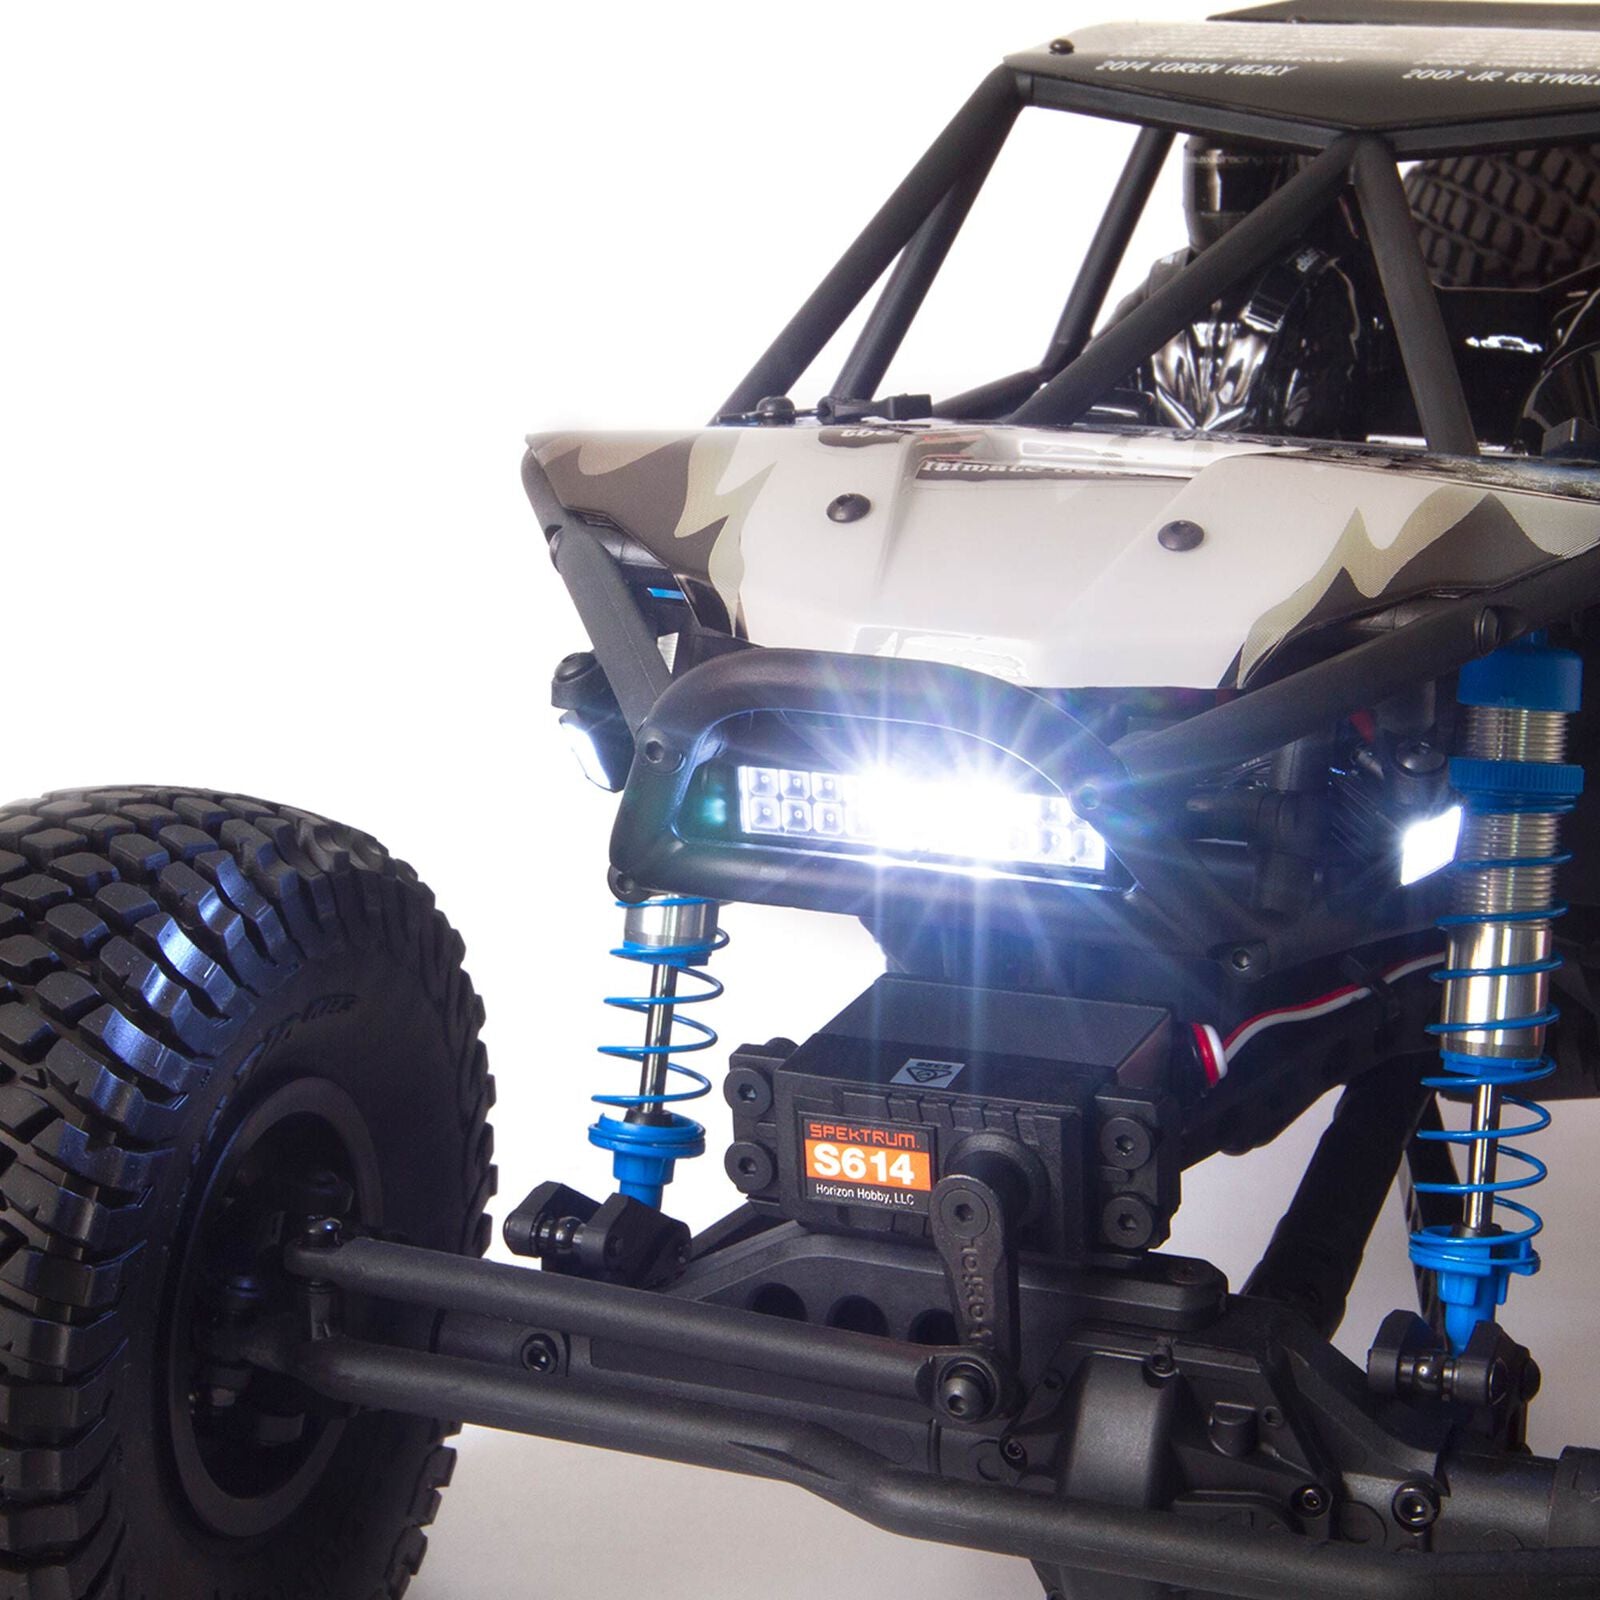 Axial 1/10 RR10 Bomber KOH Limited Edition 4WD RTR